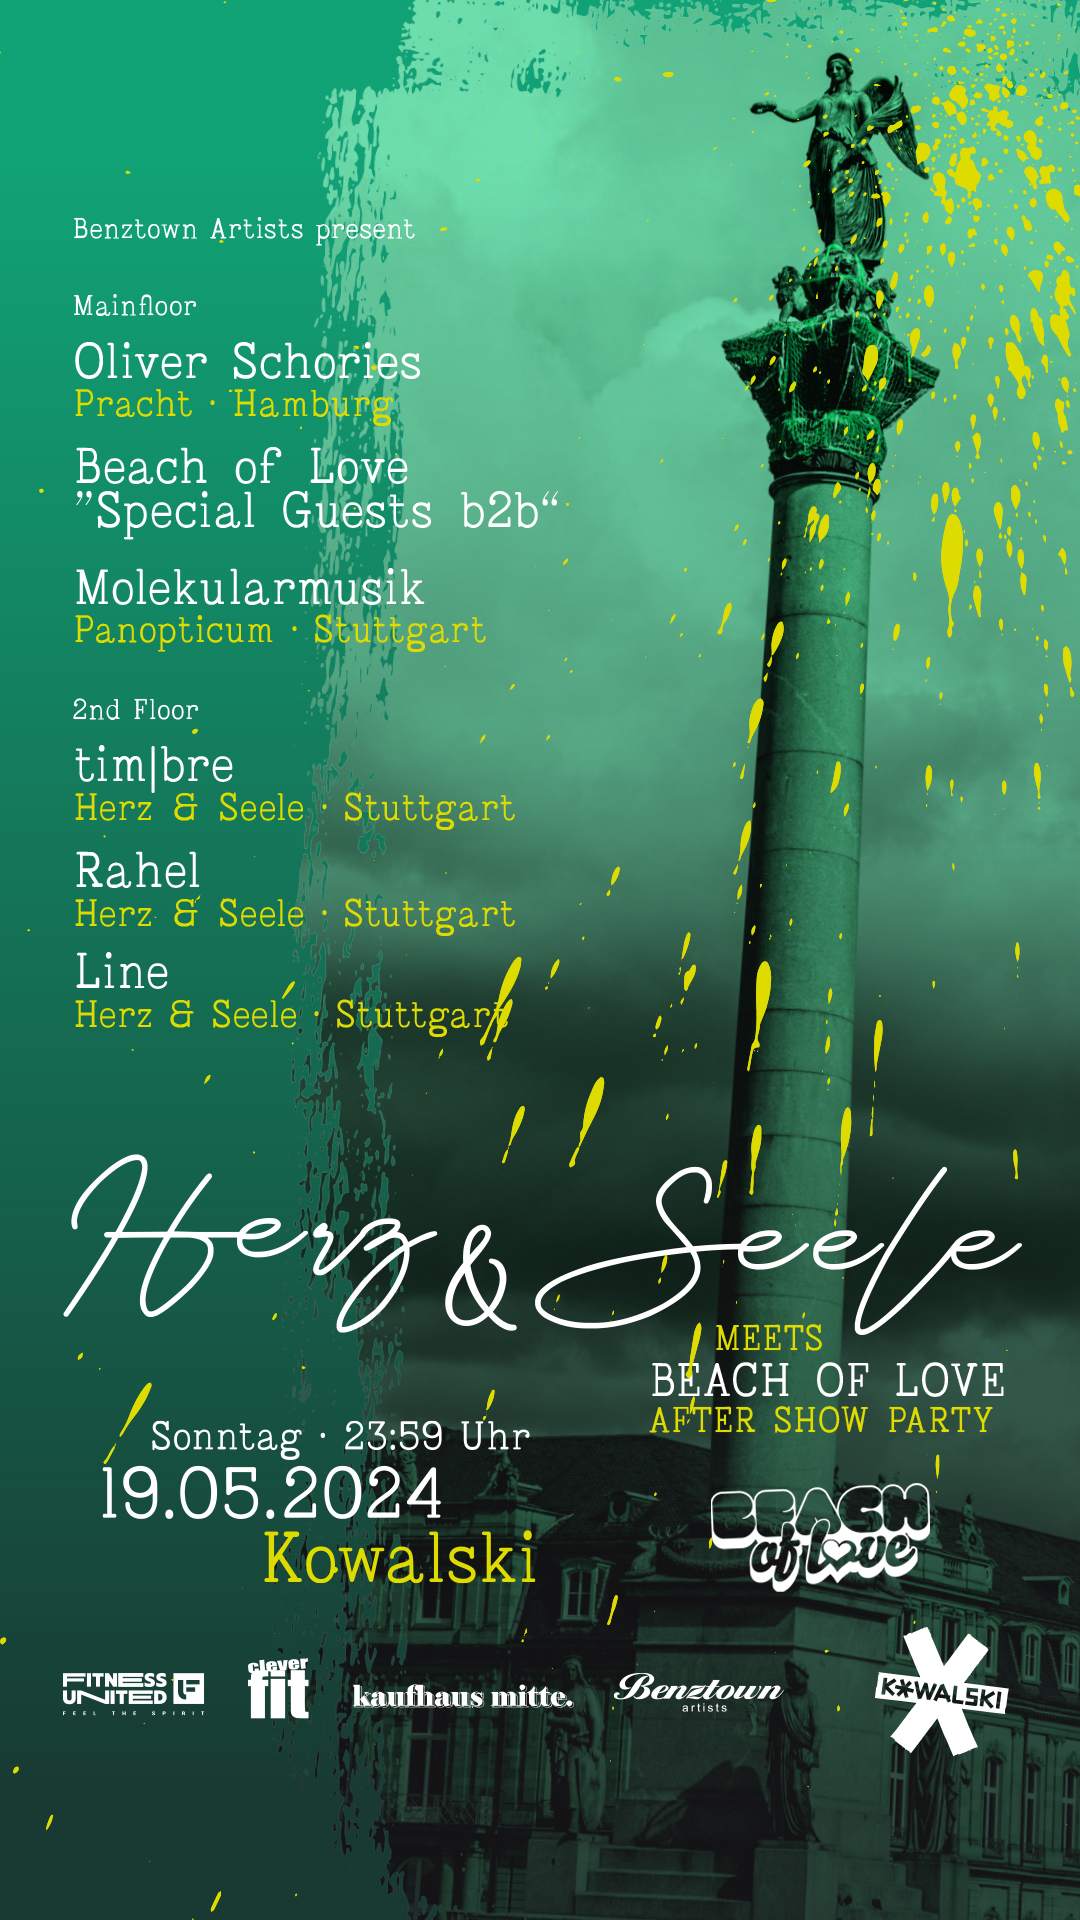 Herz & Seele meets Beach of Love - After Show Party - Página trasera